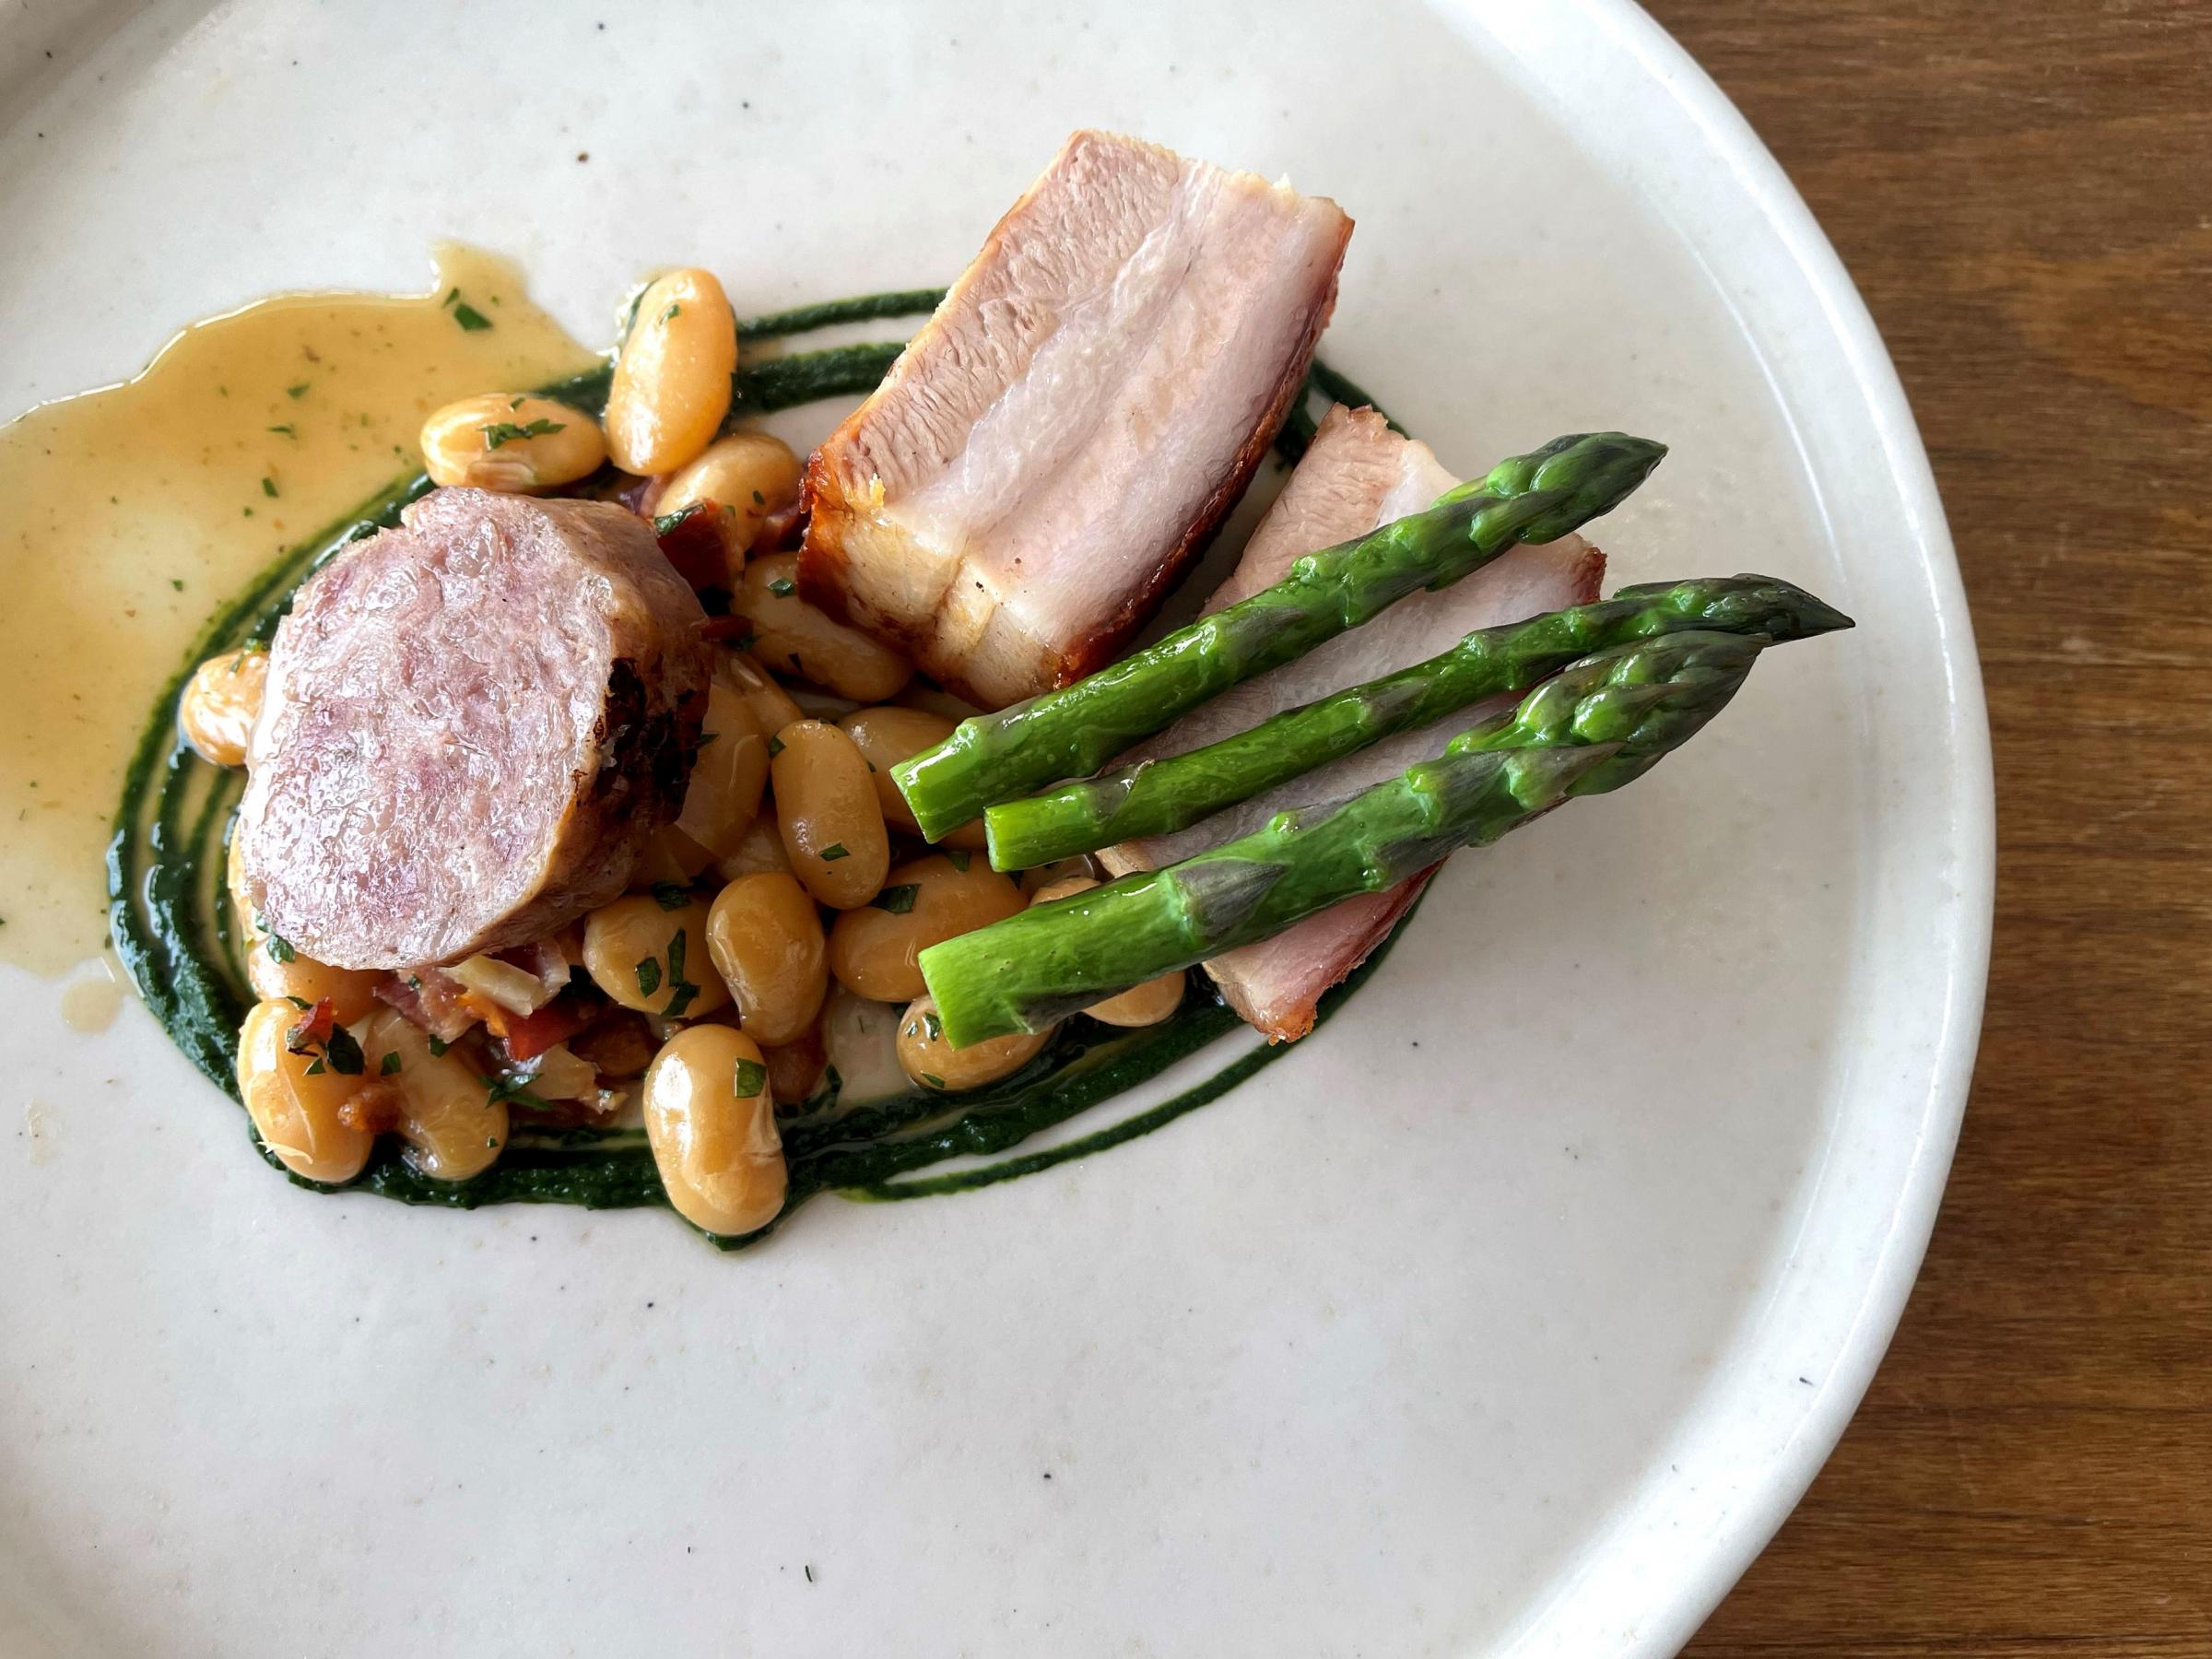 Pork belly, smoked bacon and sausage with asparagus and butter bean ragout